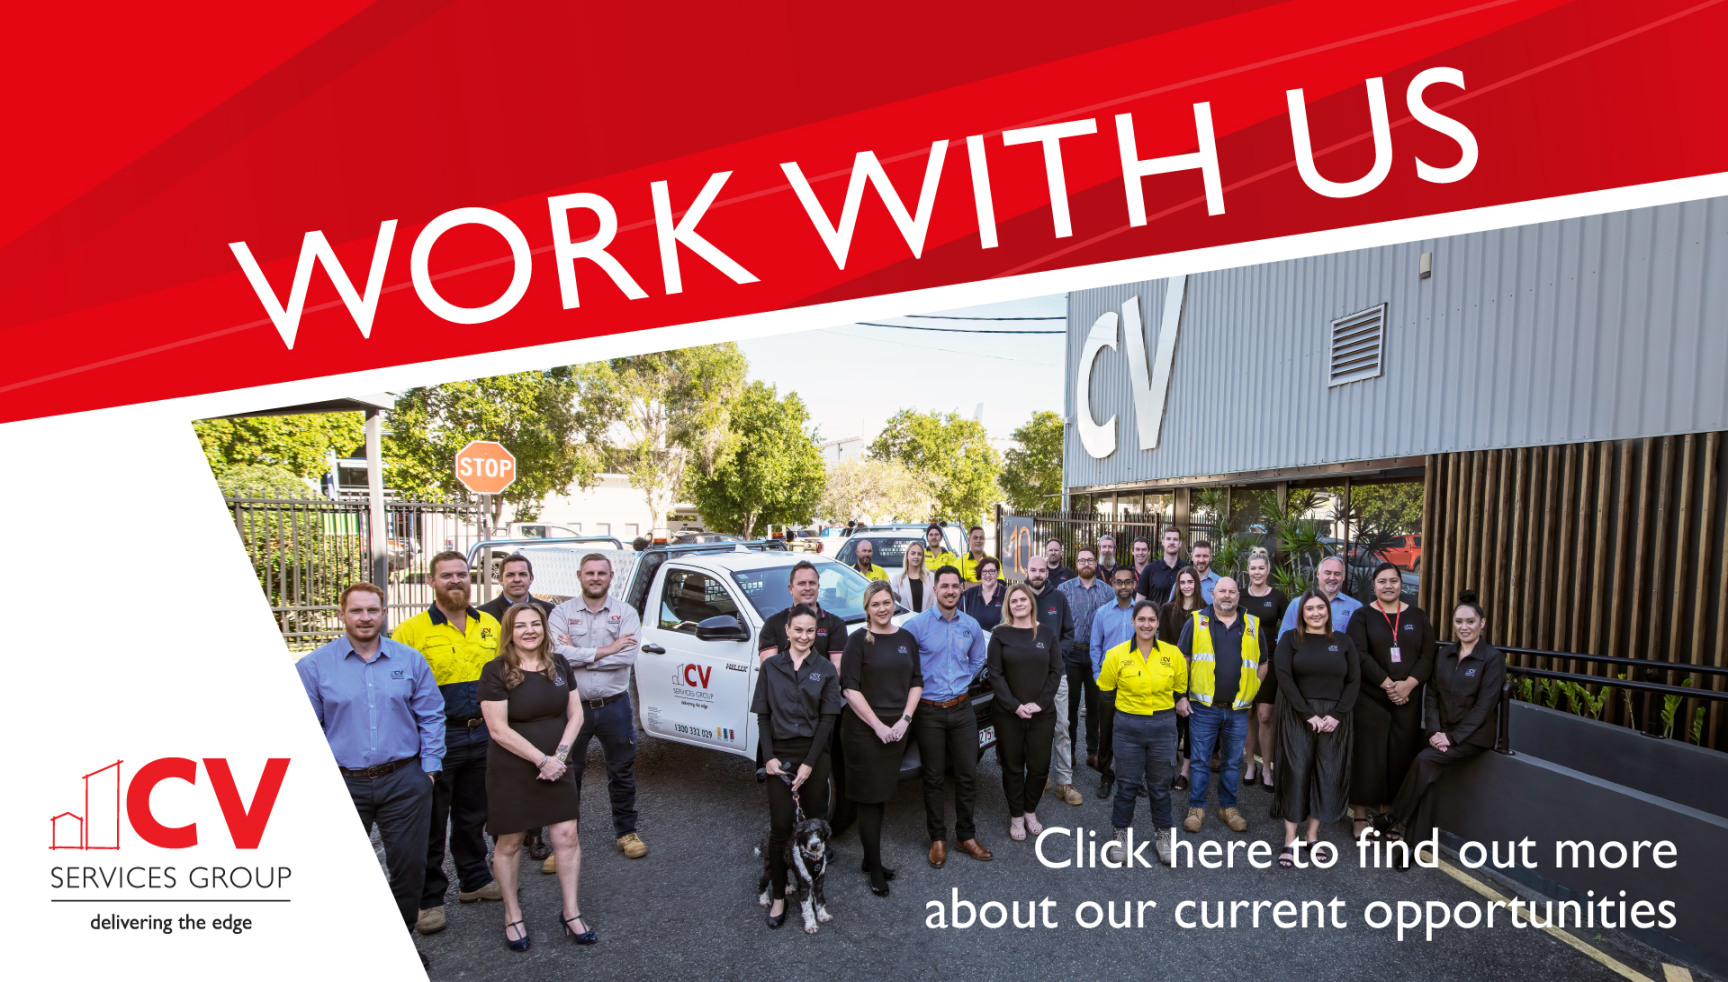 Work with Us – CV Services Group